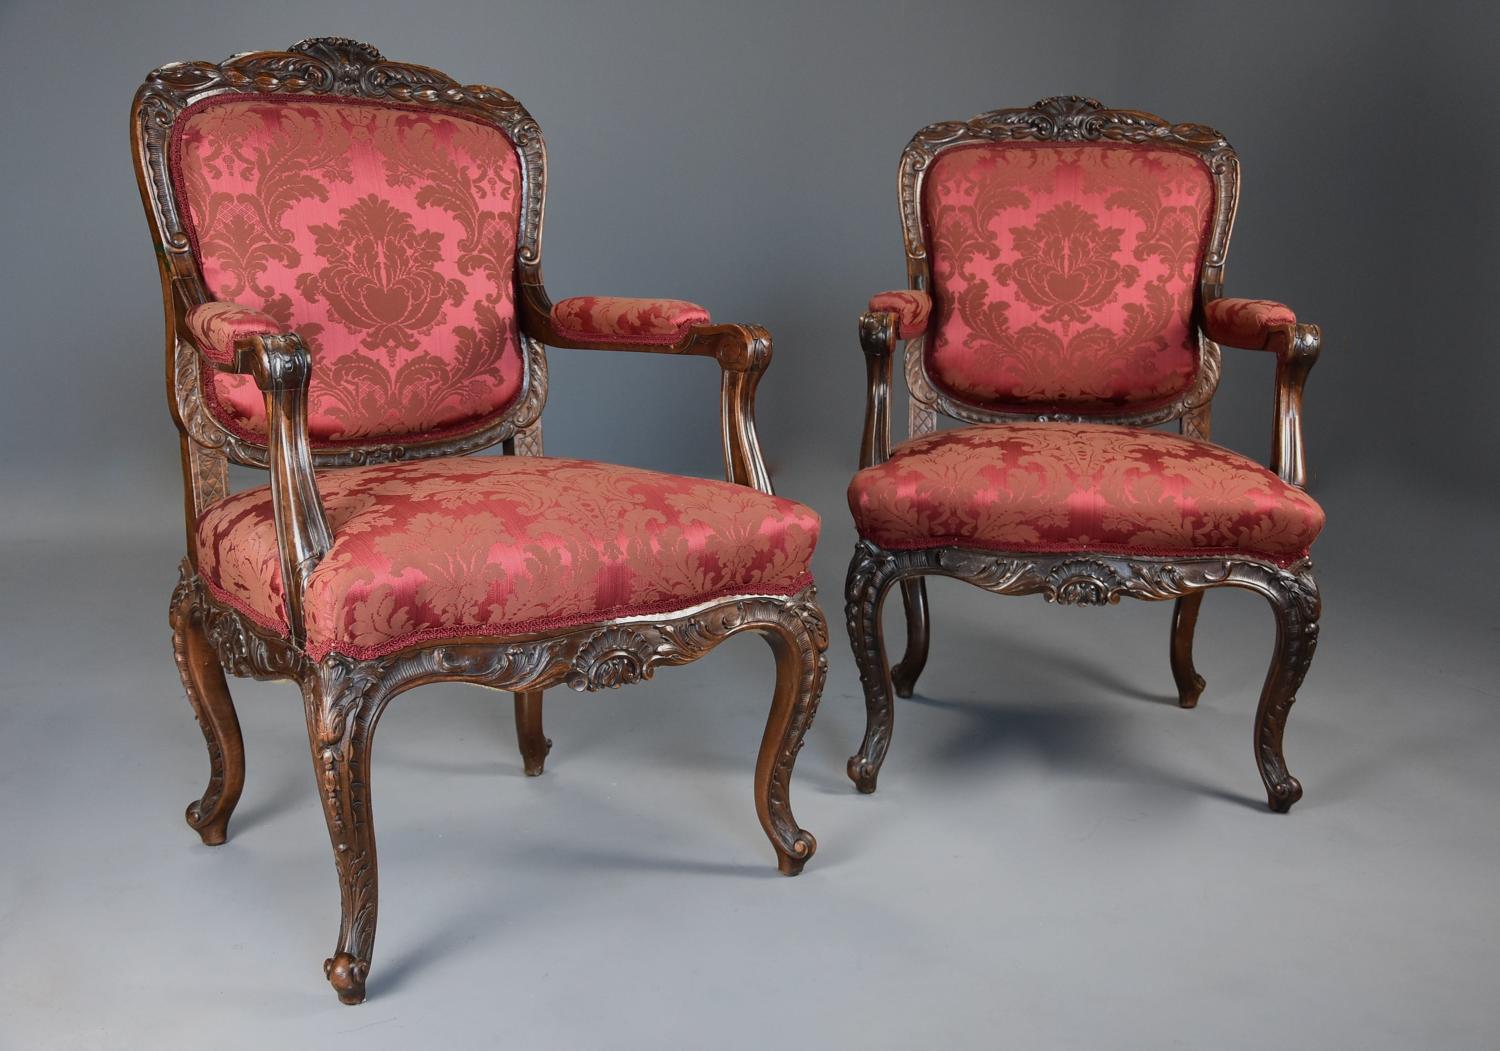 Pair of fine quality French 19thc walnut fauteuils or open armchairs